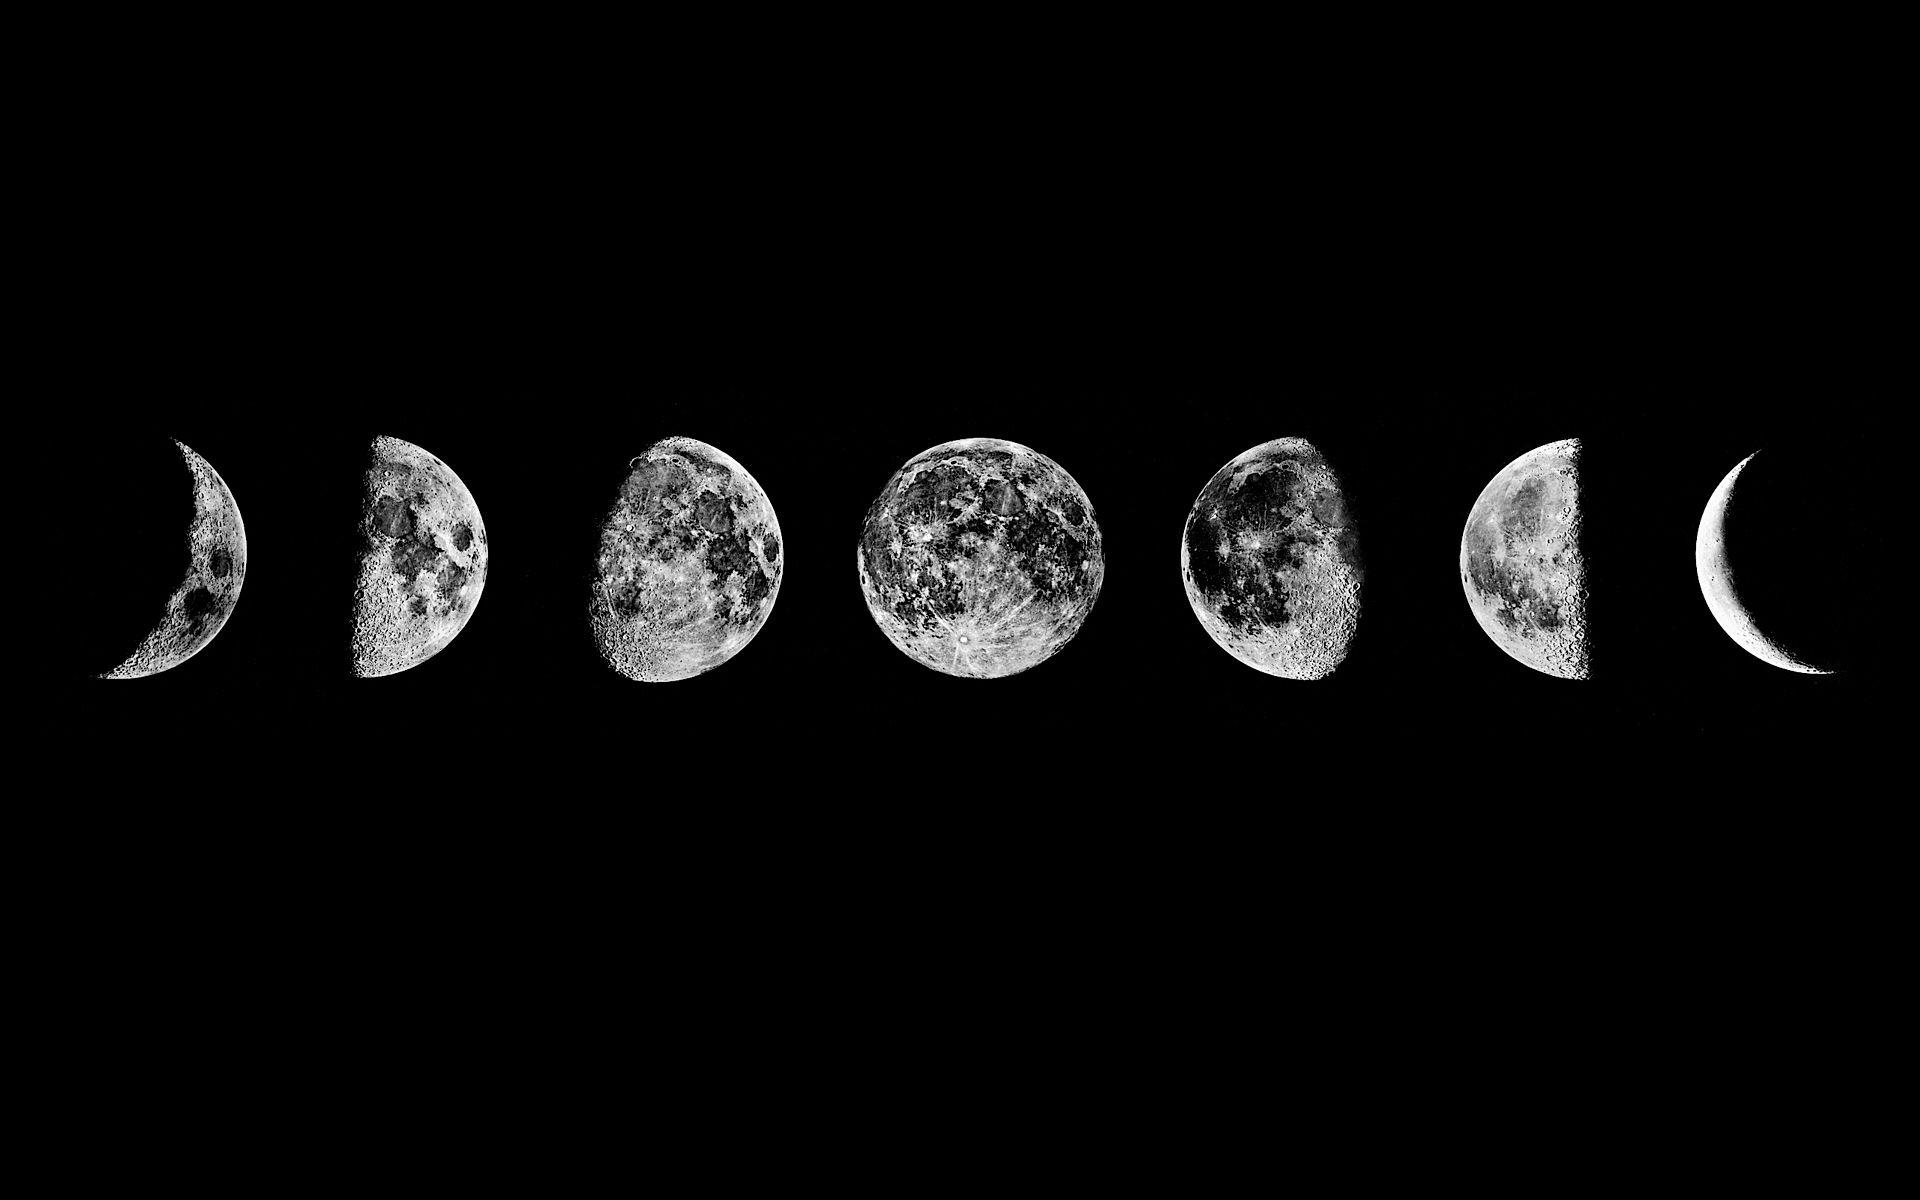 Moon phases Wallpaper. Home is where the ♥ is